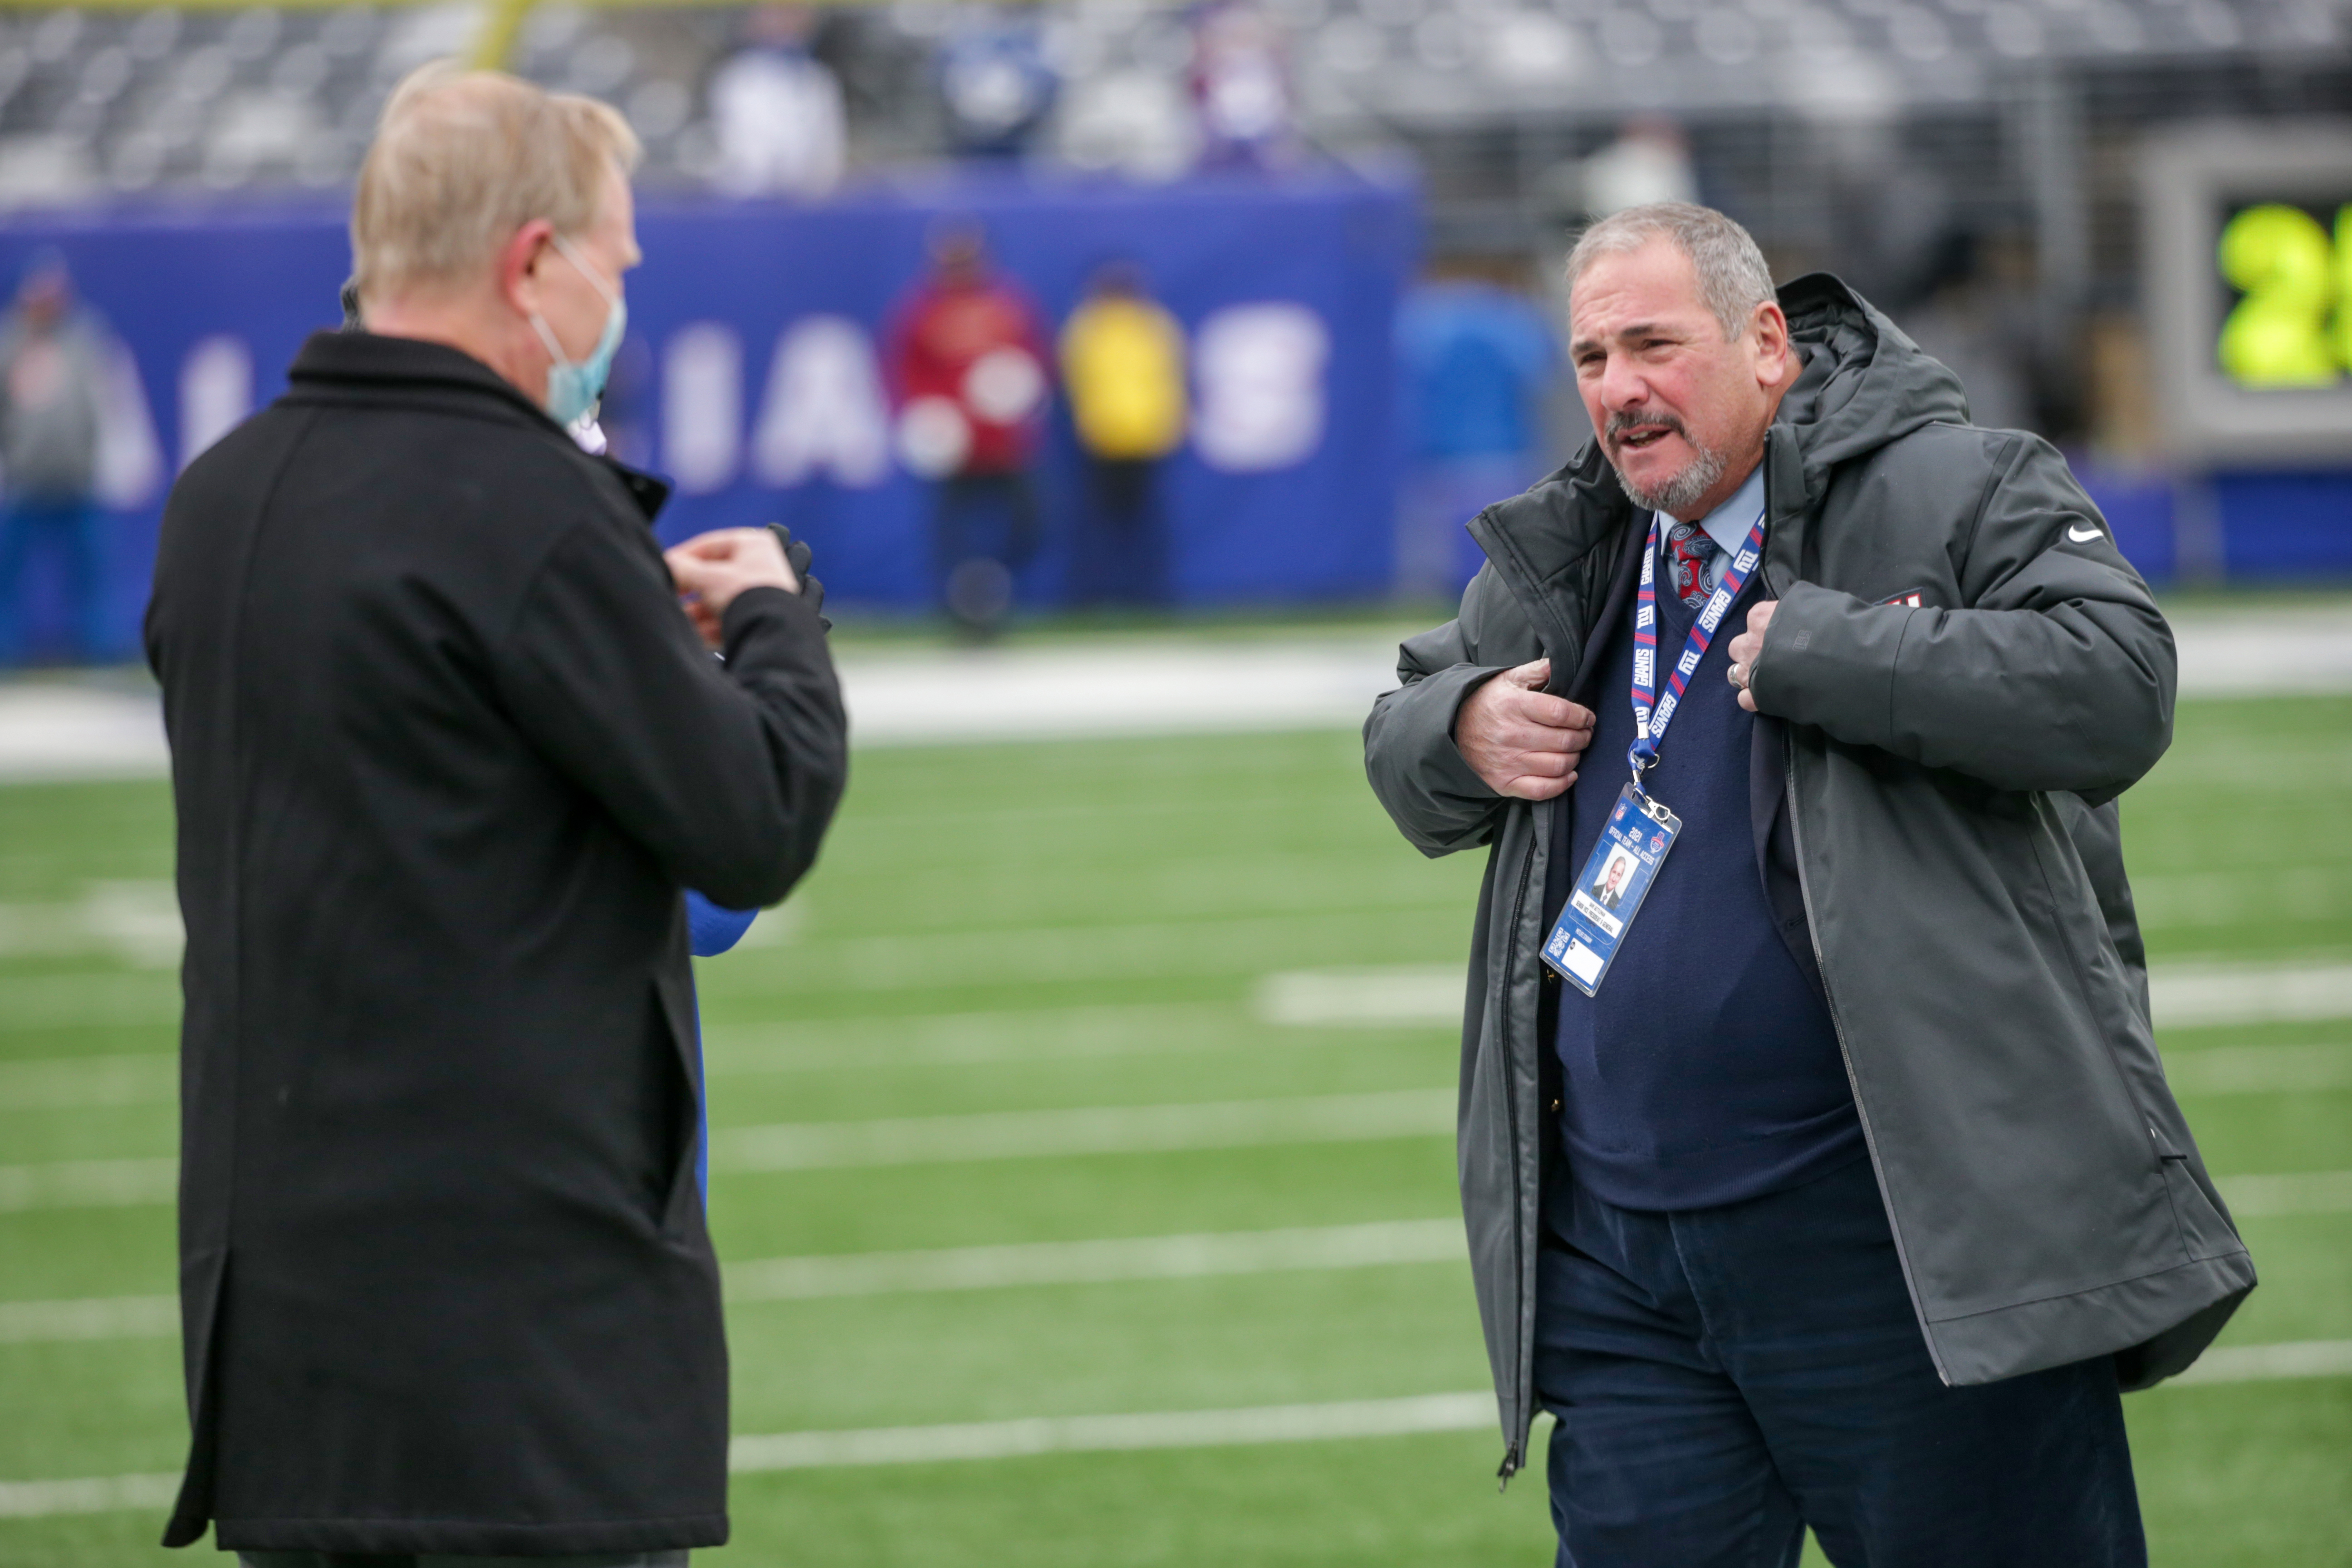 New York Giants owner John Mara (left) and general manager Dave Gettleman during pregame warmups as the Giants prepare to host the Washington Football Team on Sunday, Jan. 9, 2022 in East Rutherford, N.J.